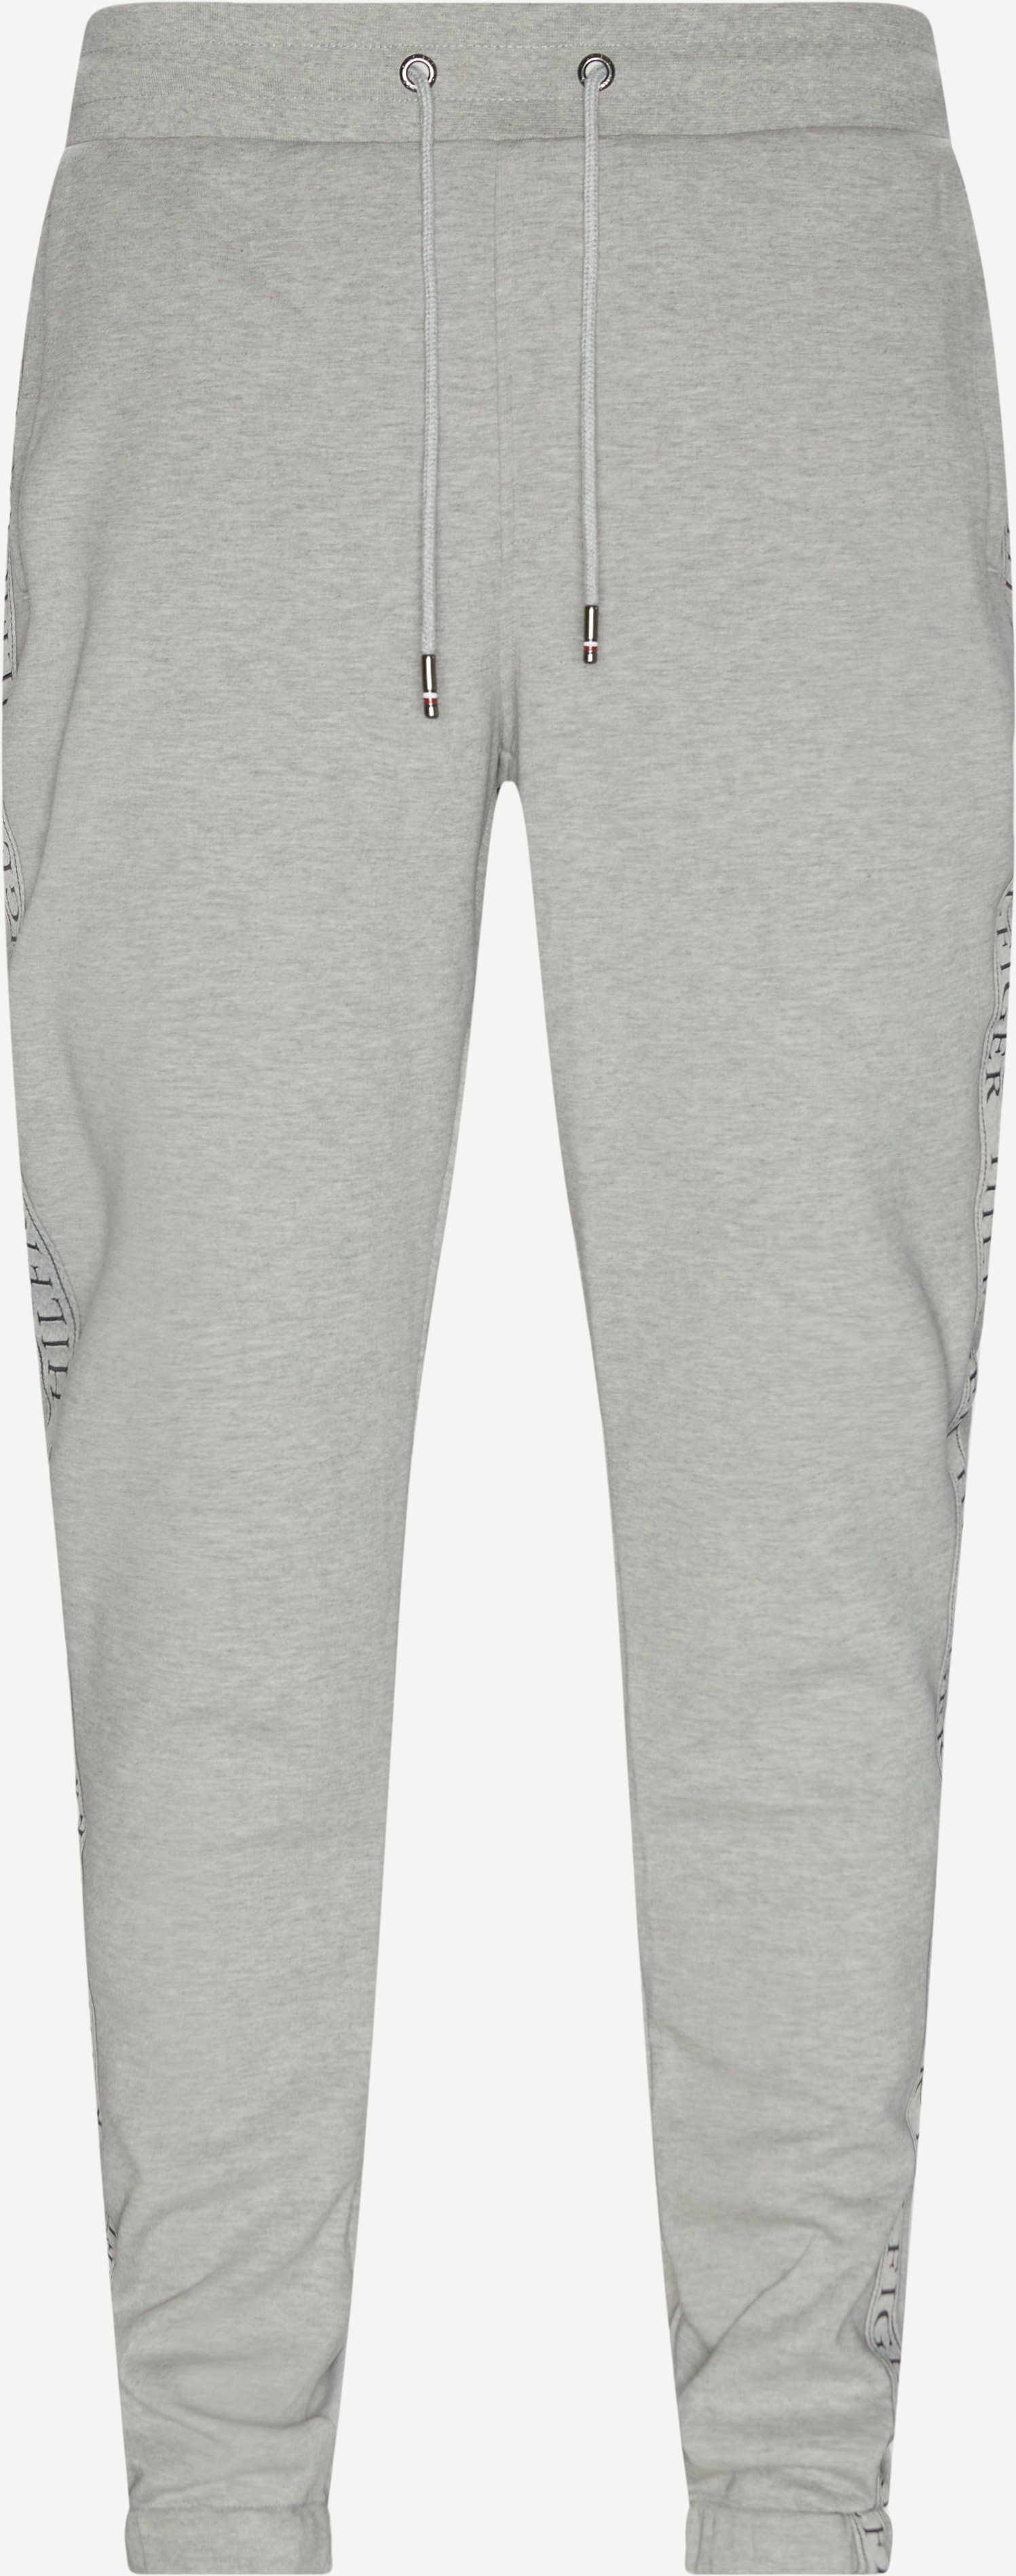 Tommy Hilfiger Trousers 20315 Grey